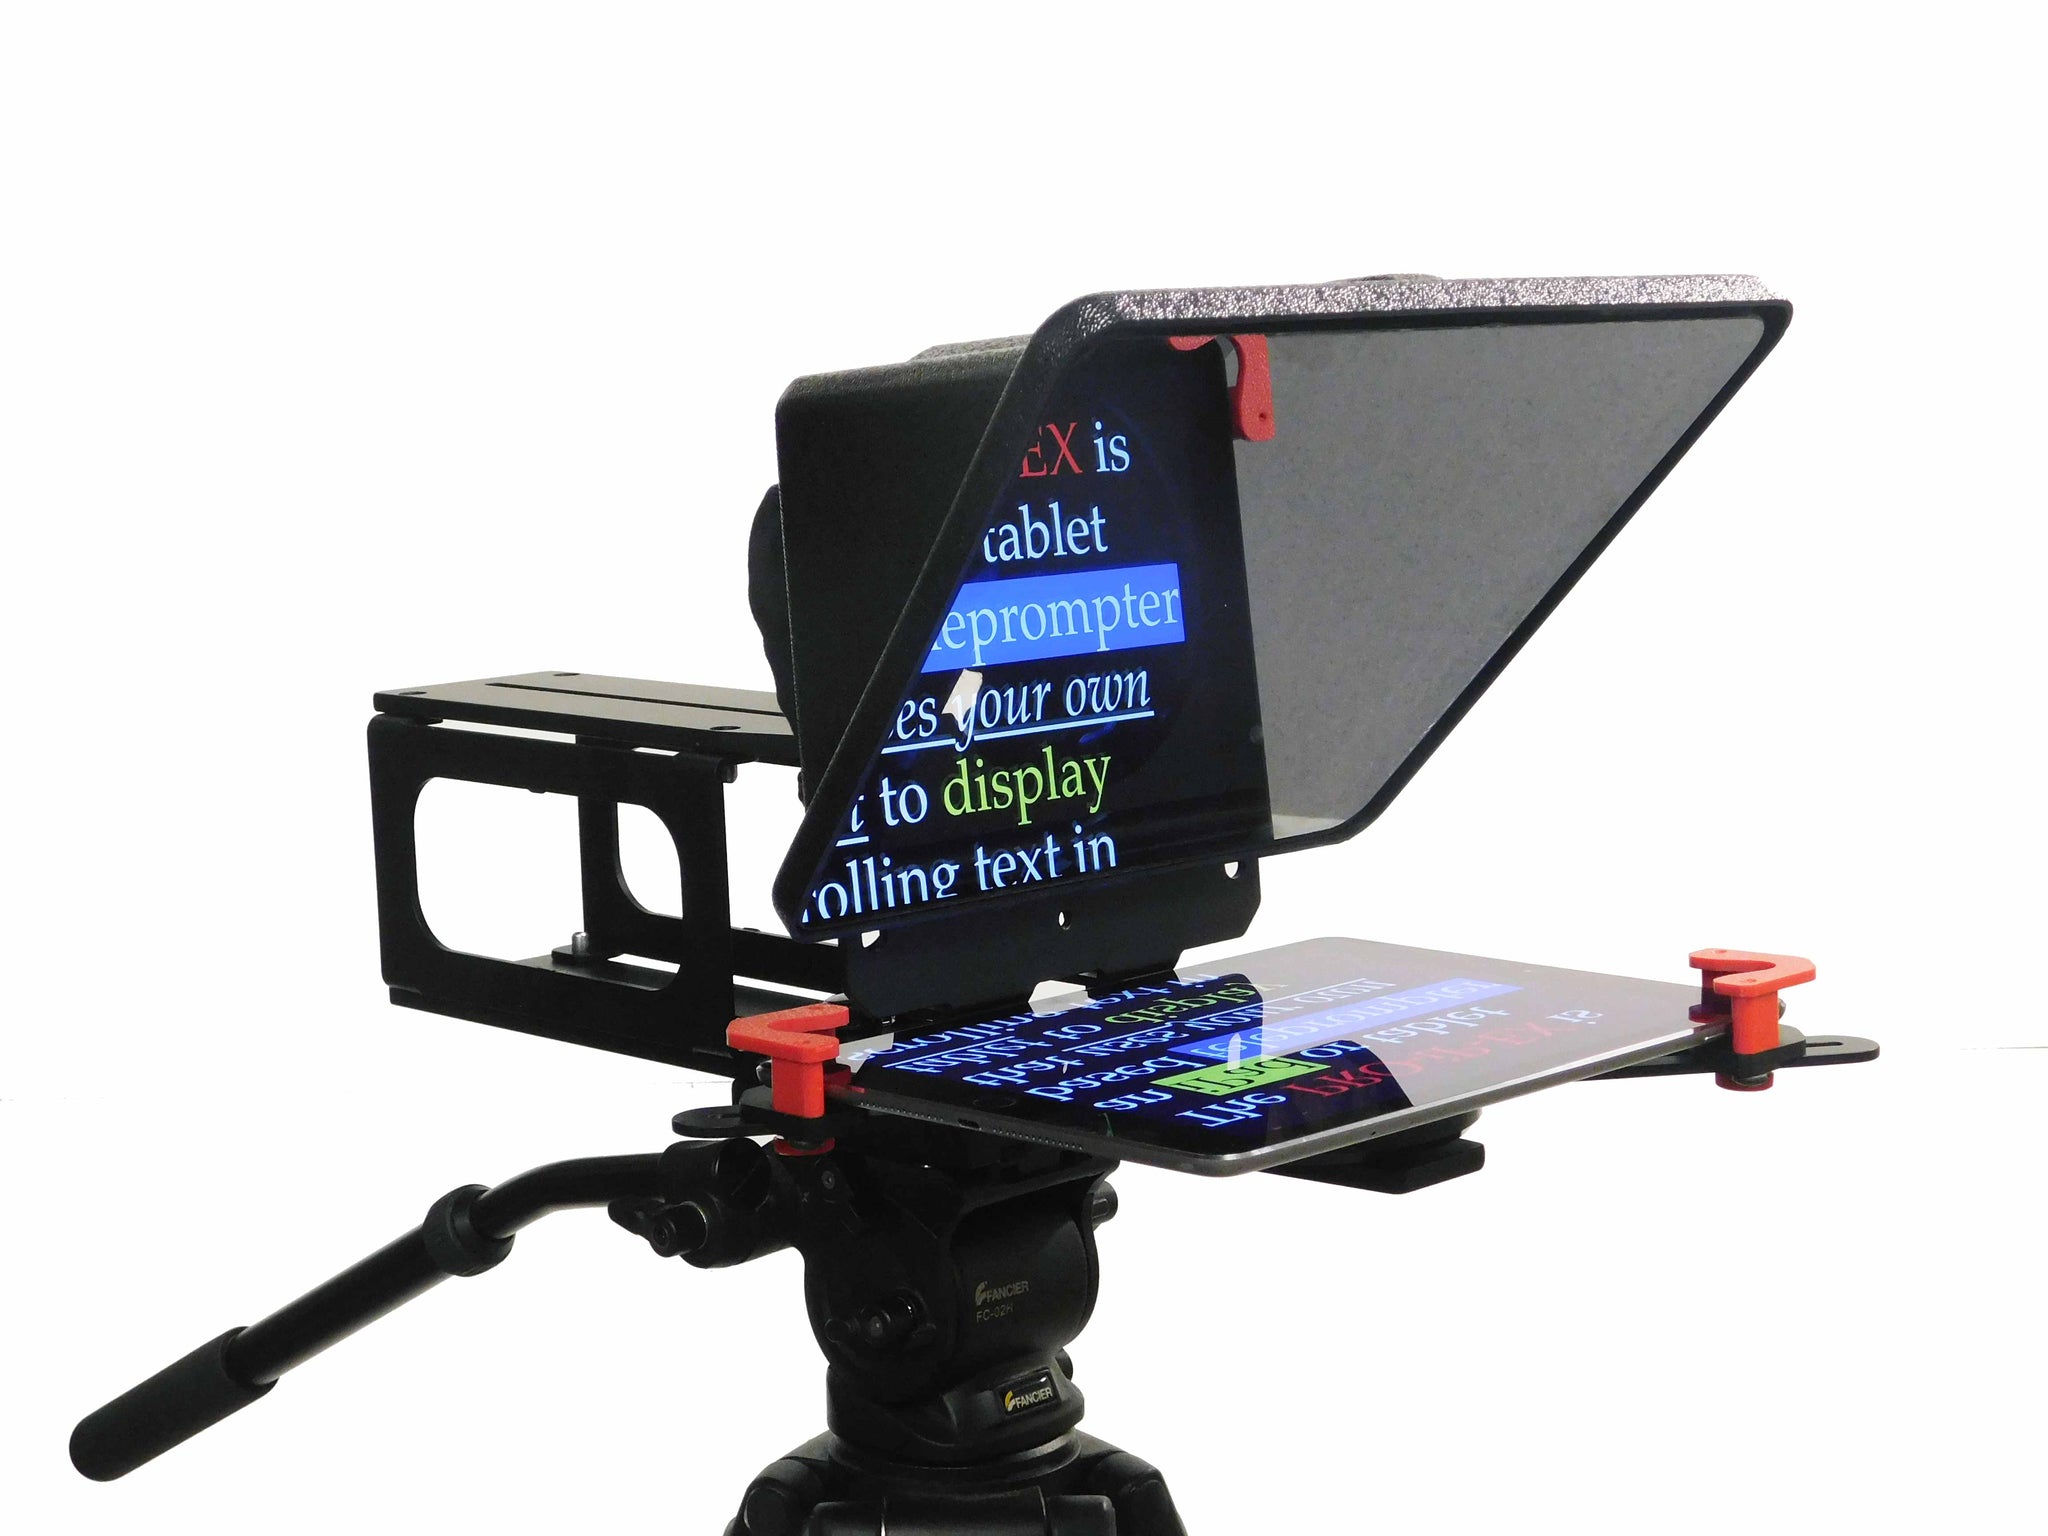 power prompter for ipad